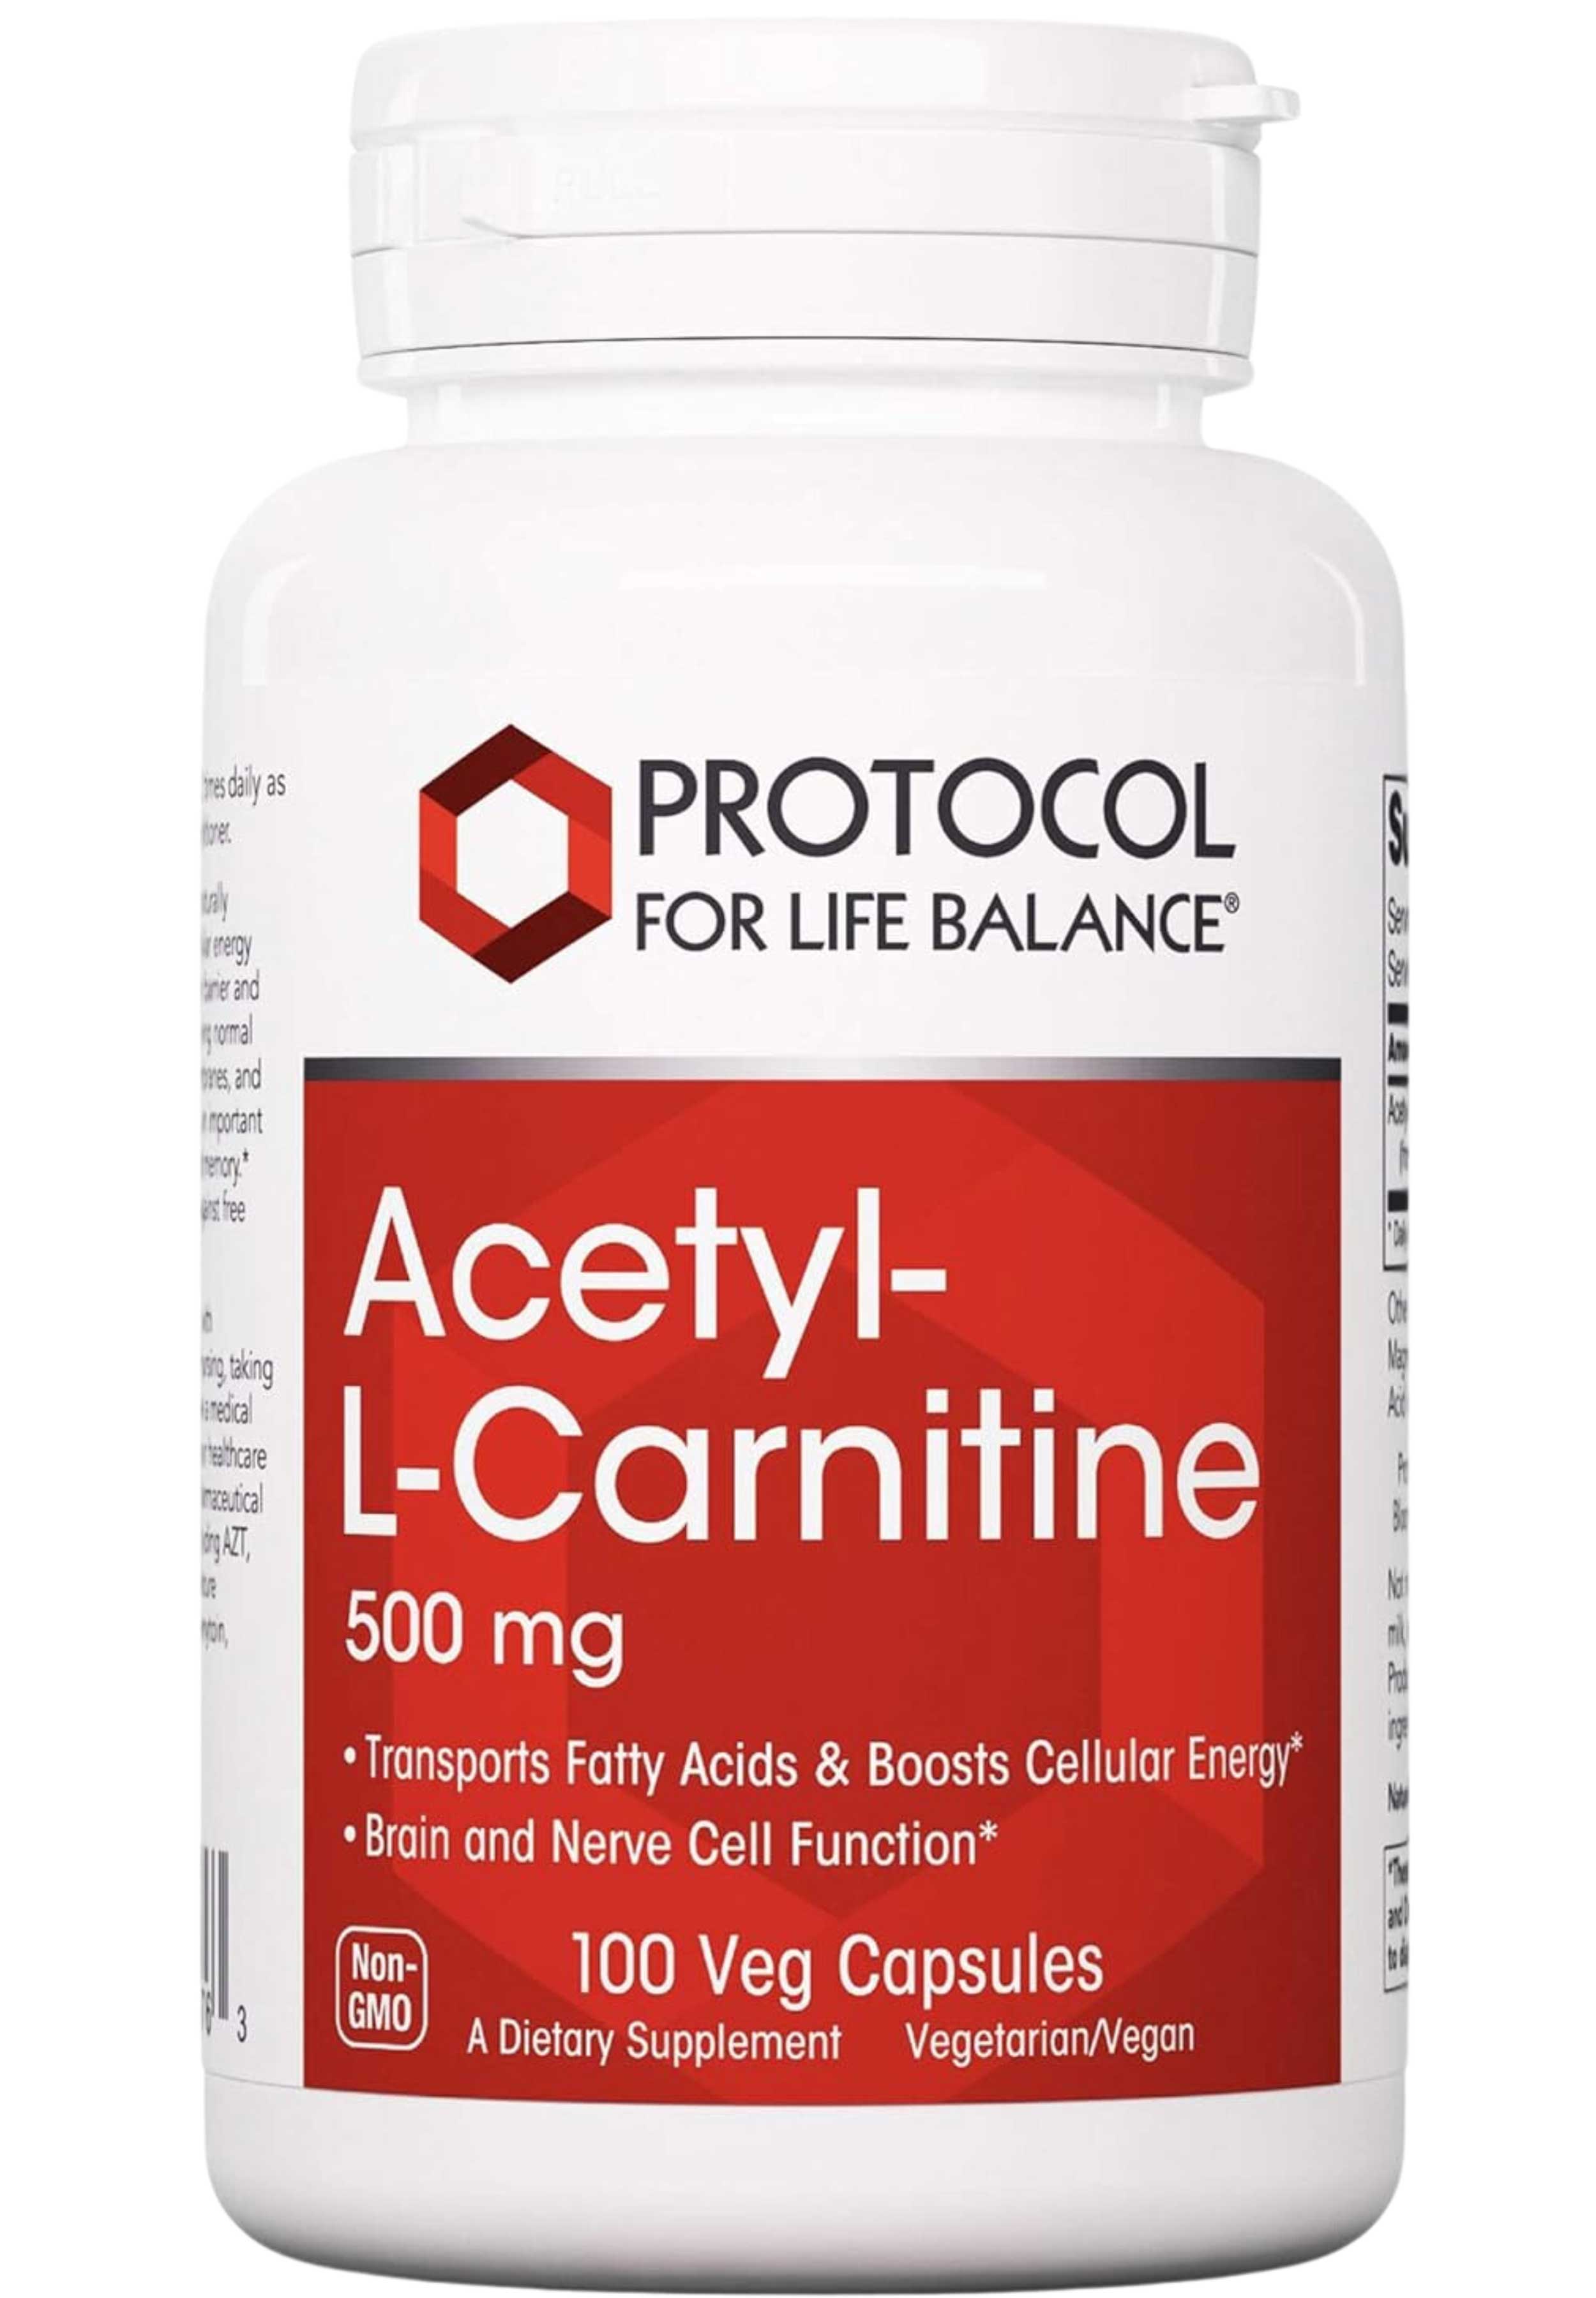 Protocol for Life Balance Acetyl-L-Carnitine